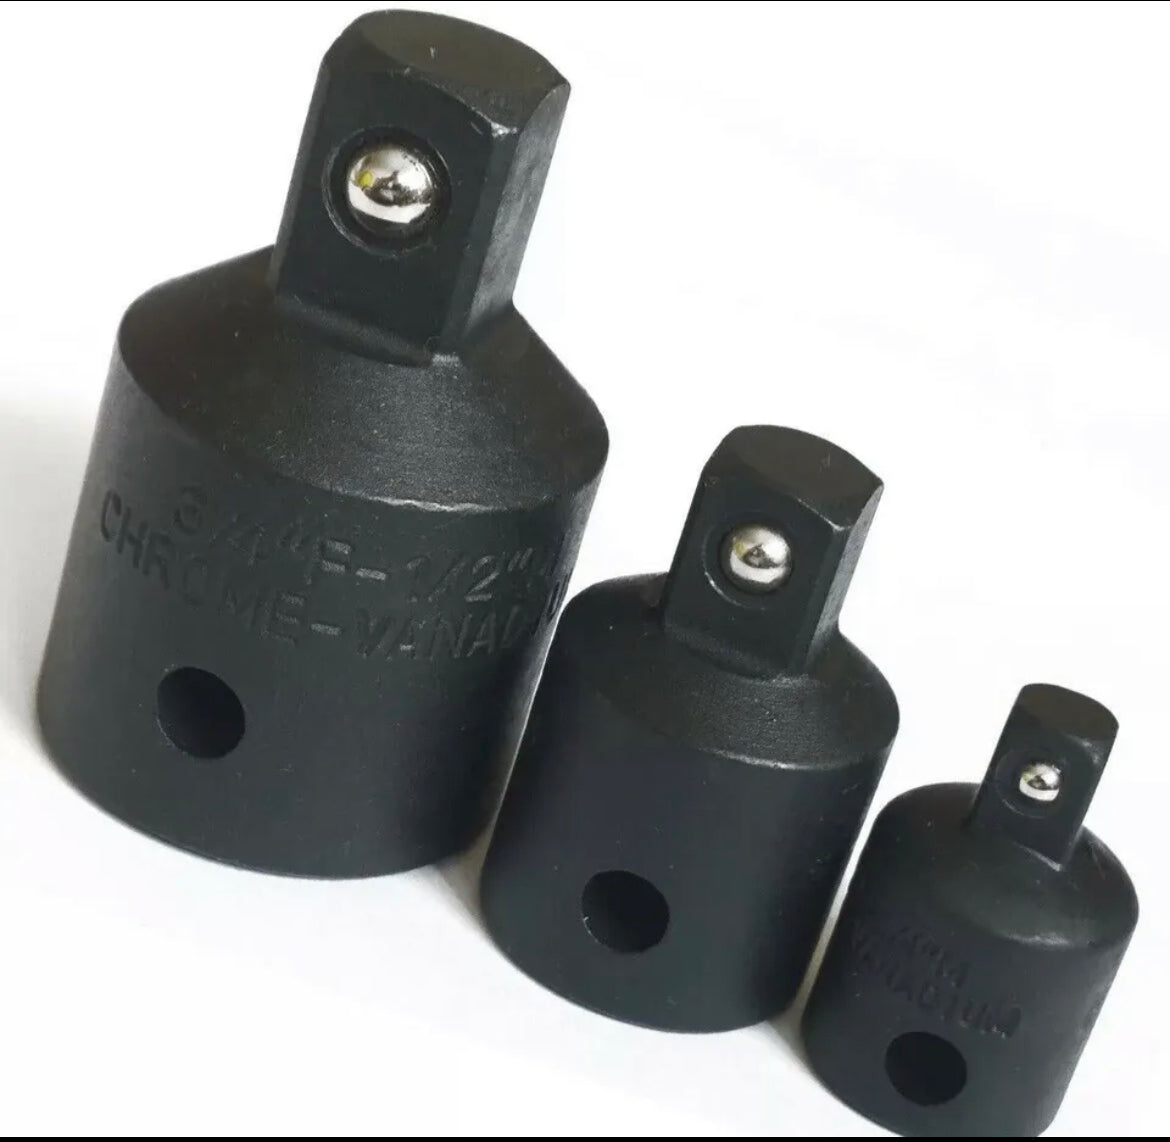 Impact Socket Reducer Set/ Step Down Adaptors 3/4 to 1/2 to 3/8 to 1/4" drives